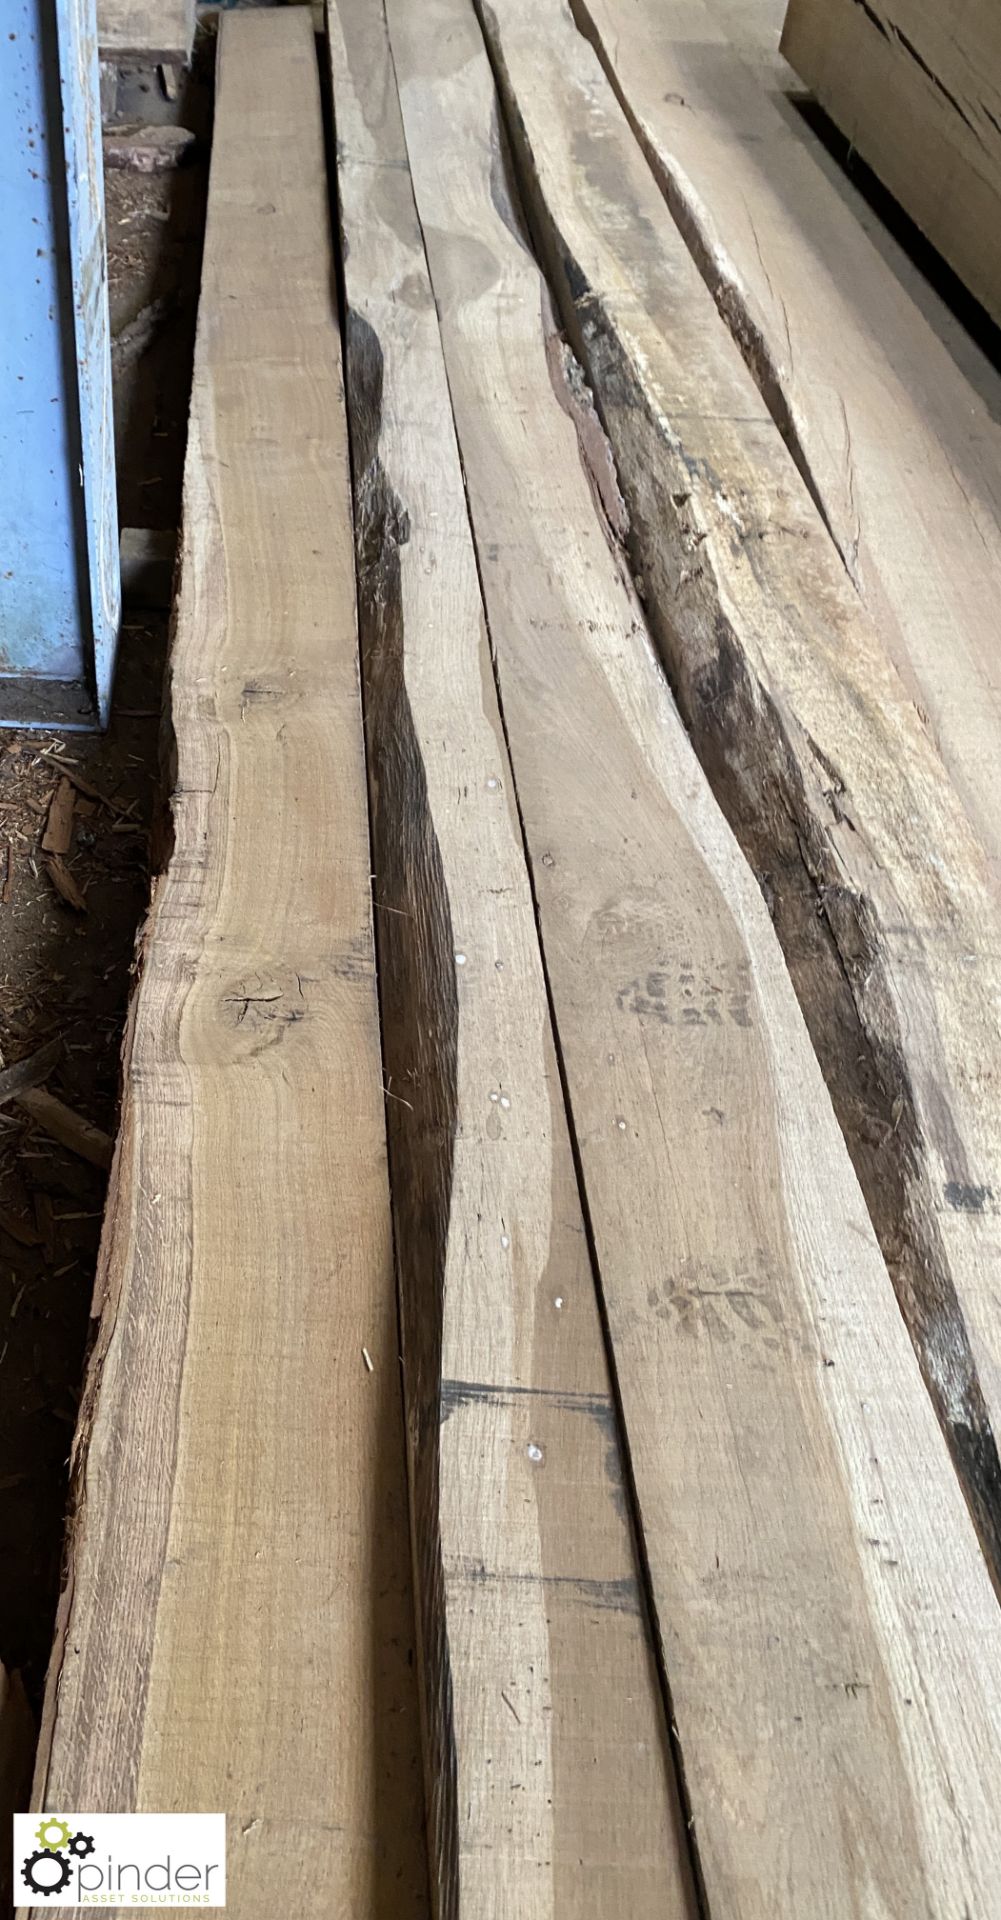 3 various air dried Oak Beams, 5100mm x 220mm x 100mm, 5100mm x 220mm x 75mm and 4500mm x 145mm x - Image 9 of 10